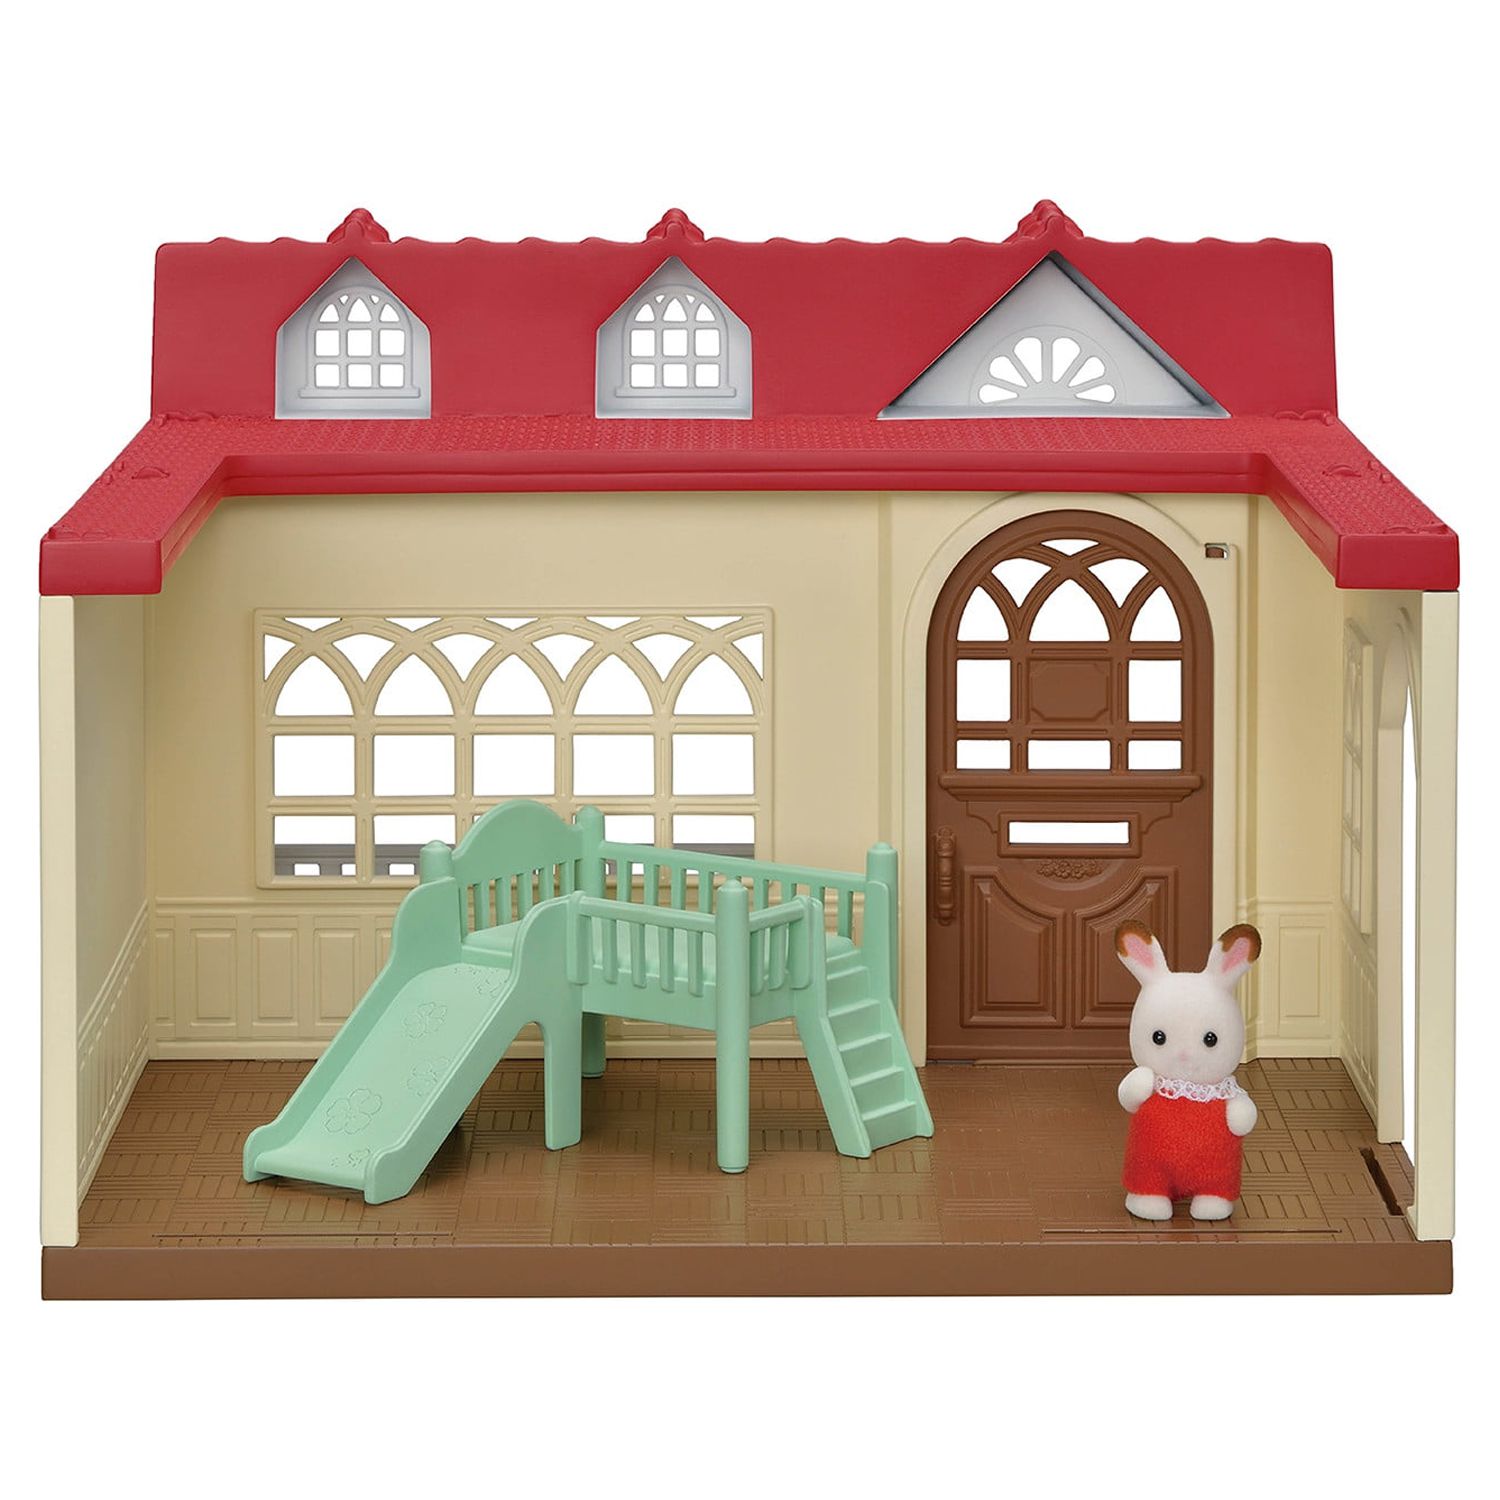 Calico Critters Sweet Raspberry Home, Dollhouse Playset with Figure and Furniture - image 1 of 8